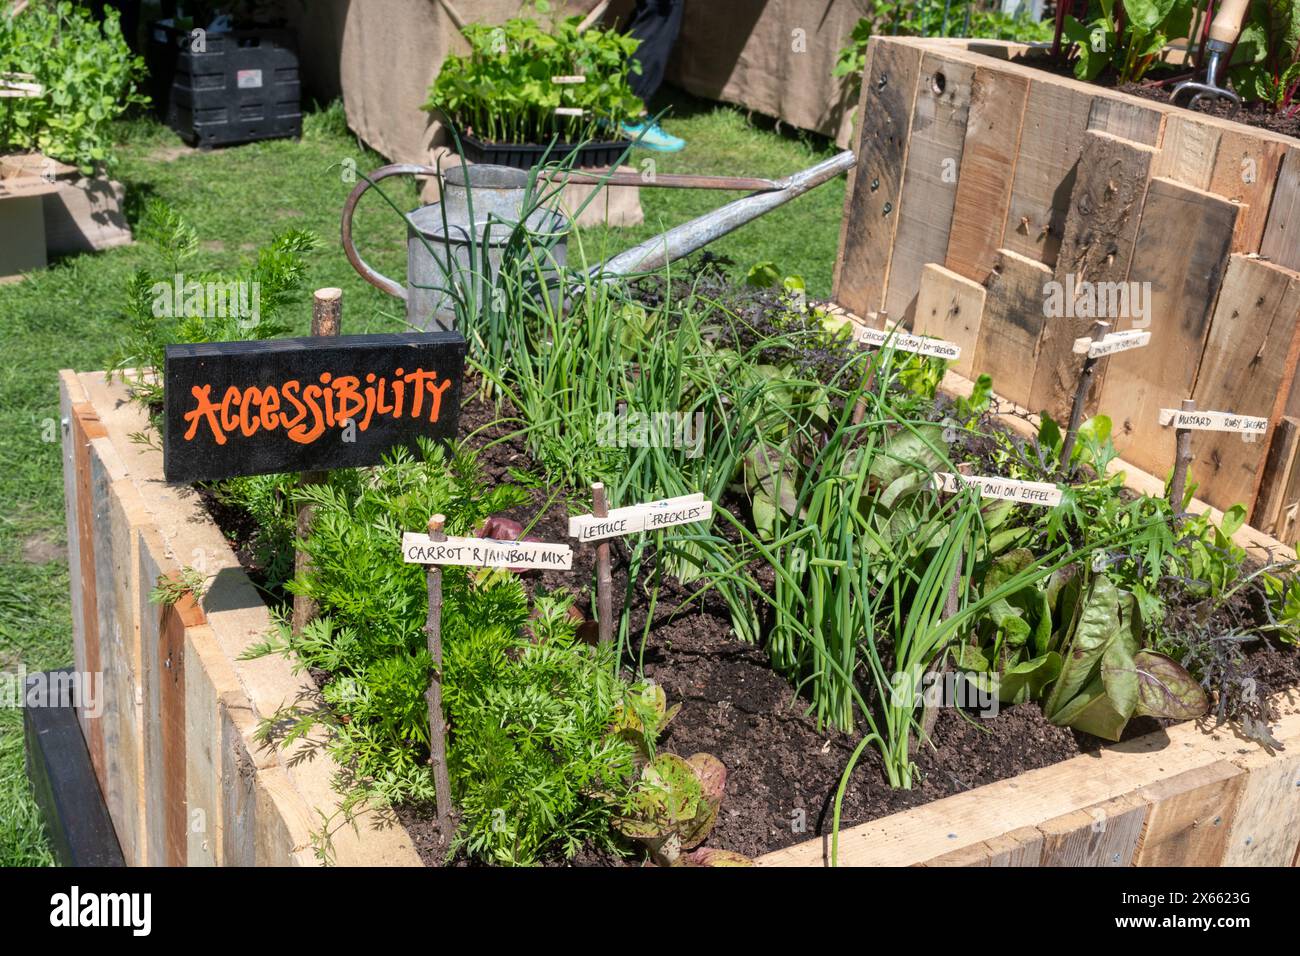 Accessibility sign in an accessible garden with raised bed for growing plants vegetables produce vegetable gardening Stock Photo